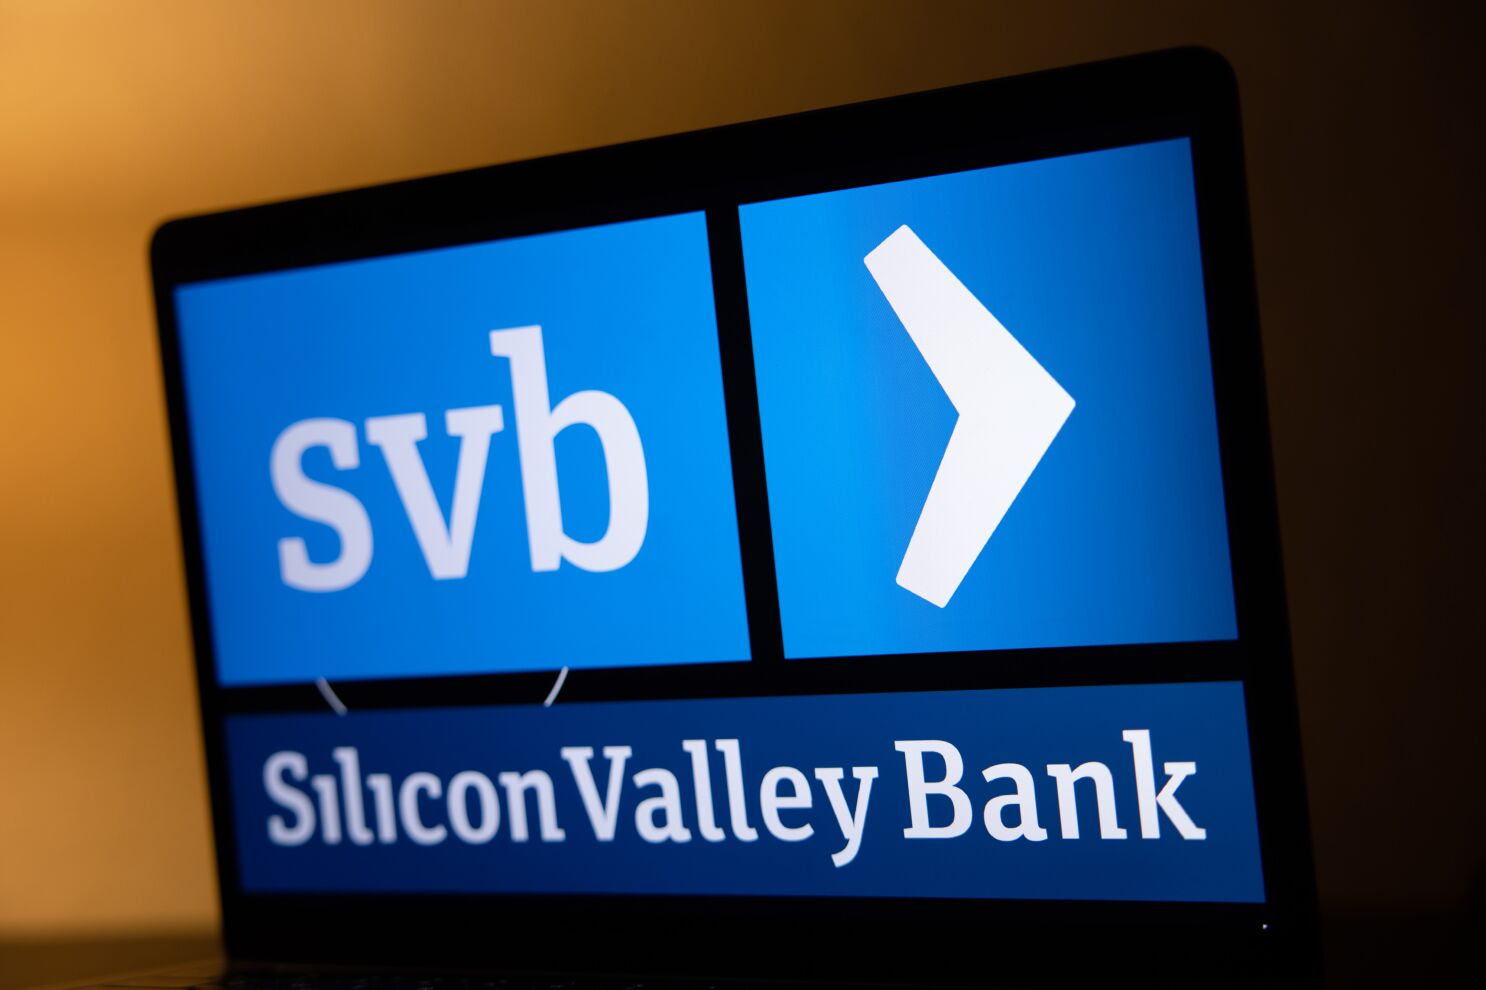 Valley Bank is in sale after failed, CNBC says - Los Angeles Times